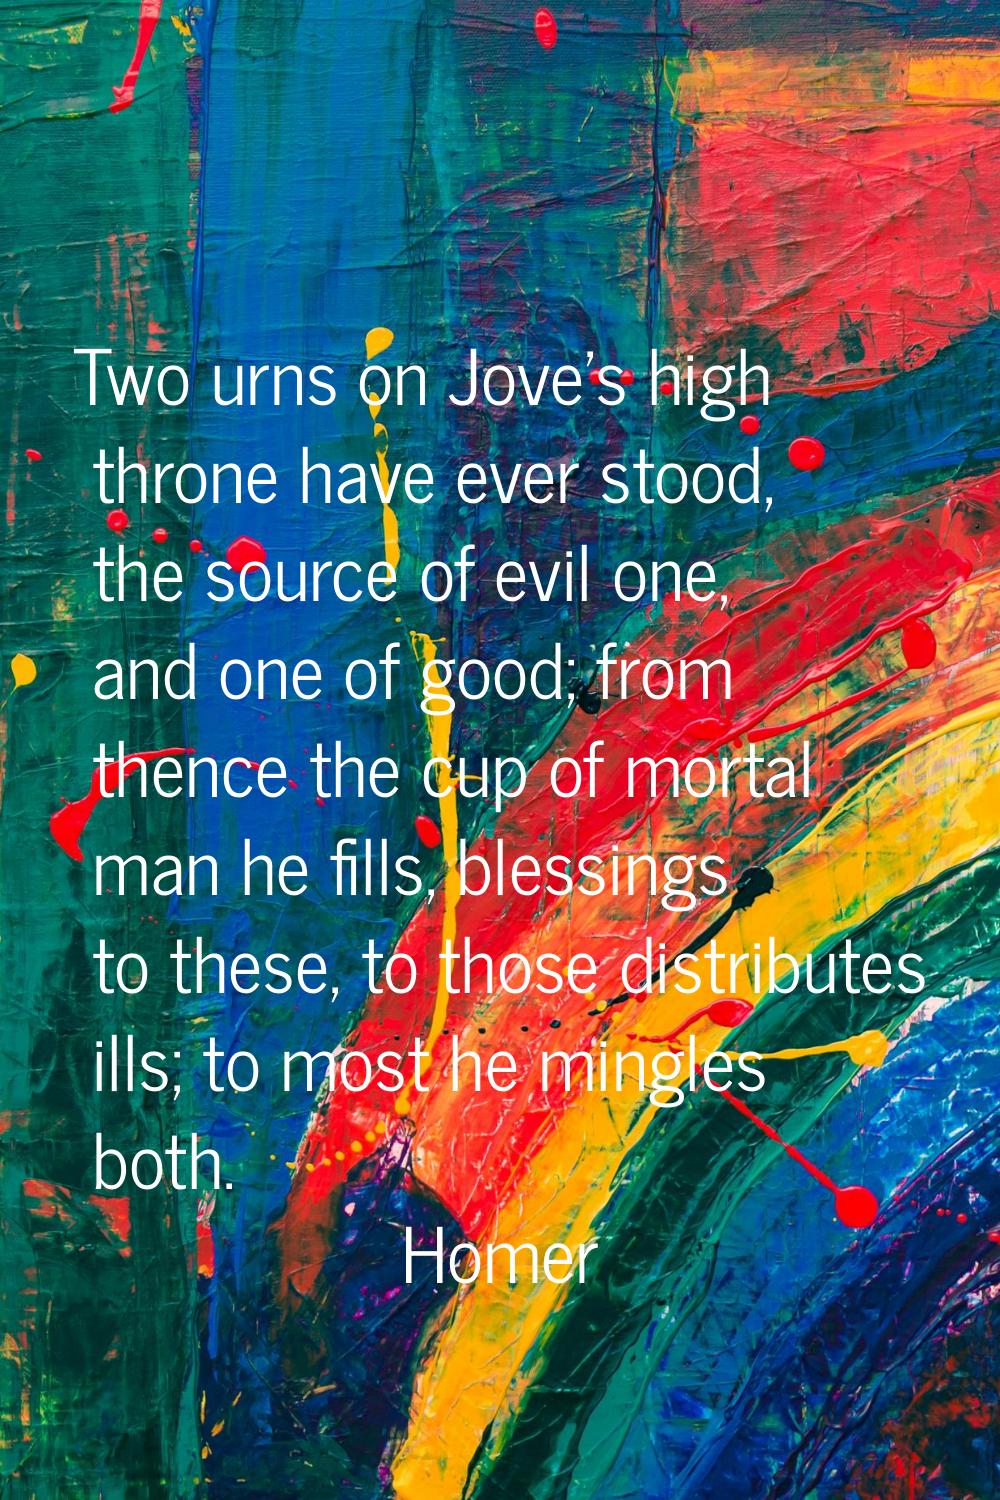 Two urns on Jove's high throne have ever stood, the source of evil one, and one of good; from thenc